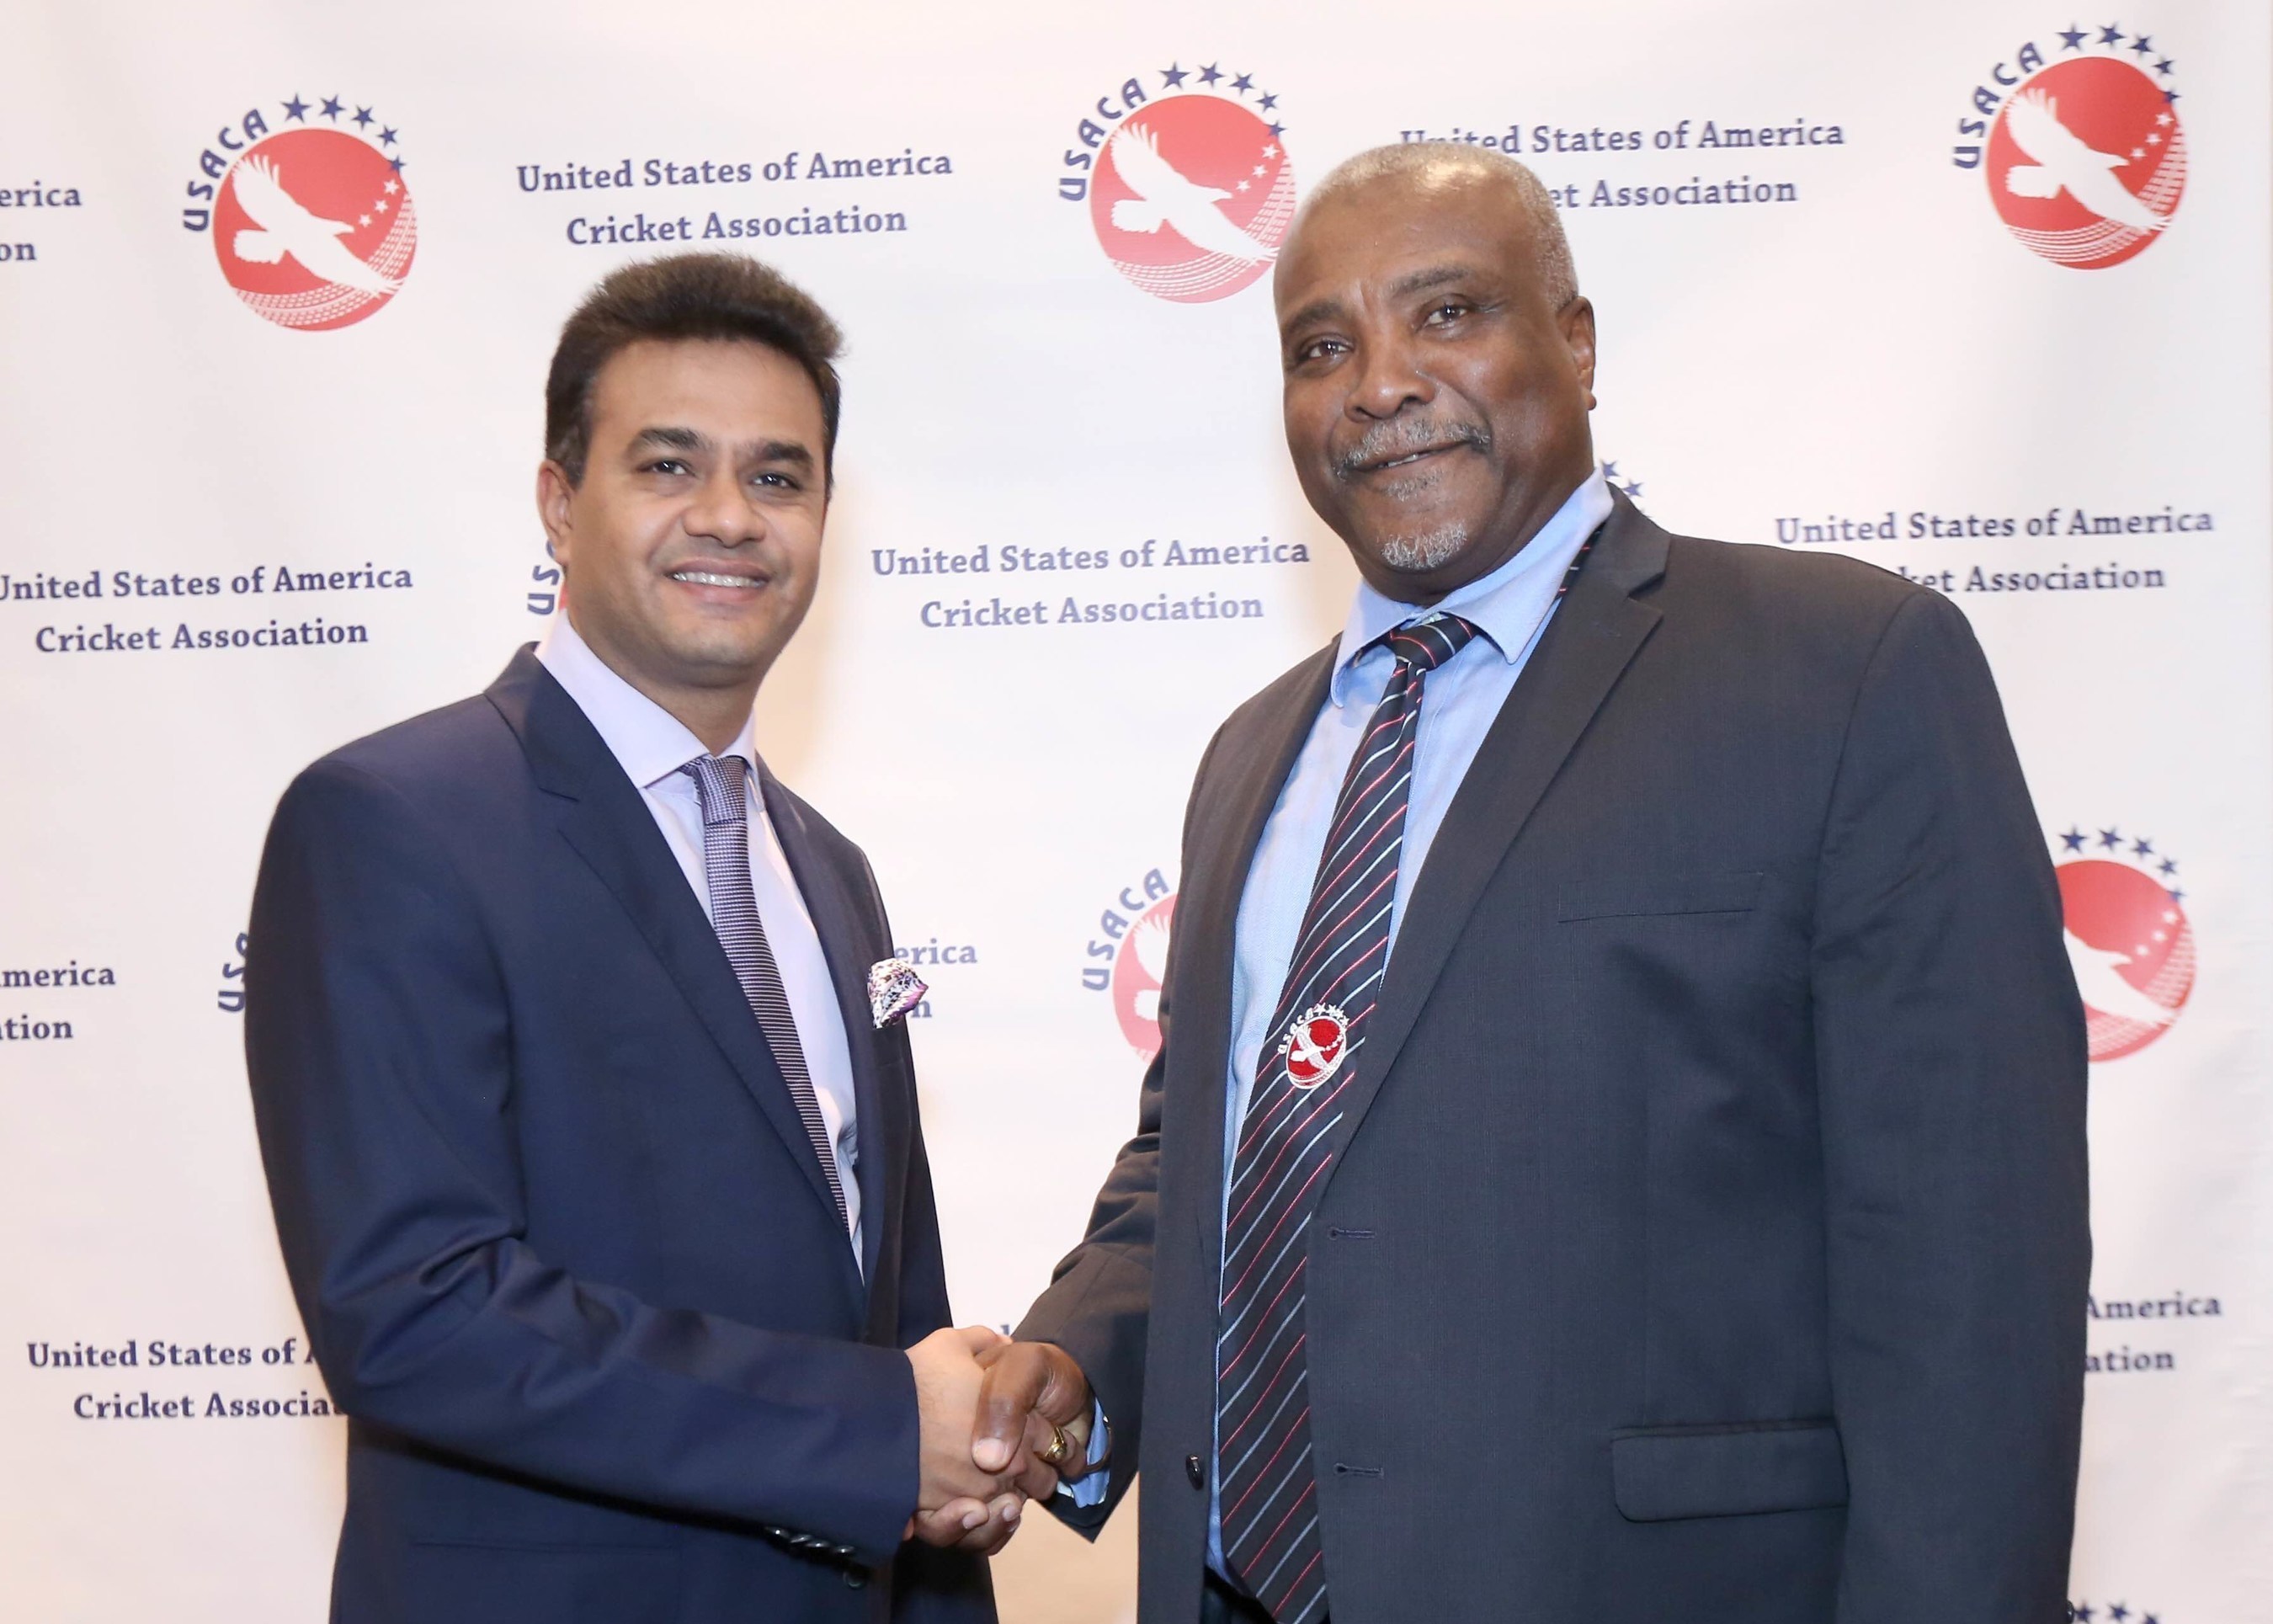 Global Sports Ventures Chairman, Jay Pandya and USACA President Gladstone Dainty shake hands during a press conference at the Marriott Marquis in New York City.